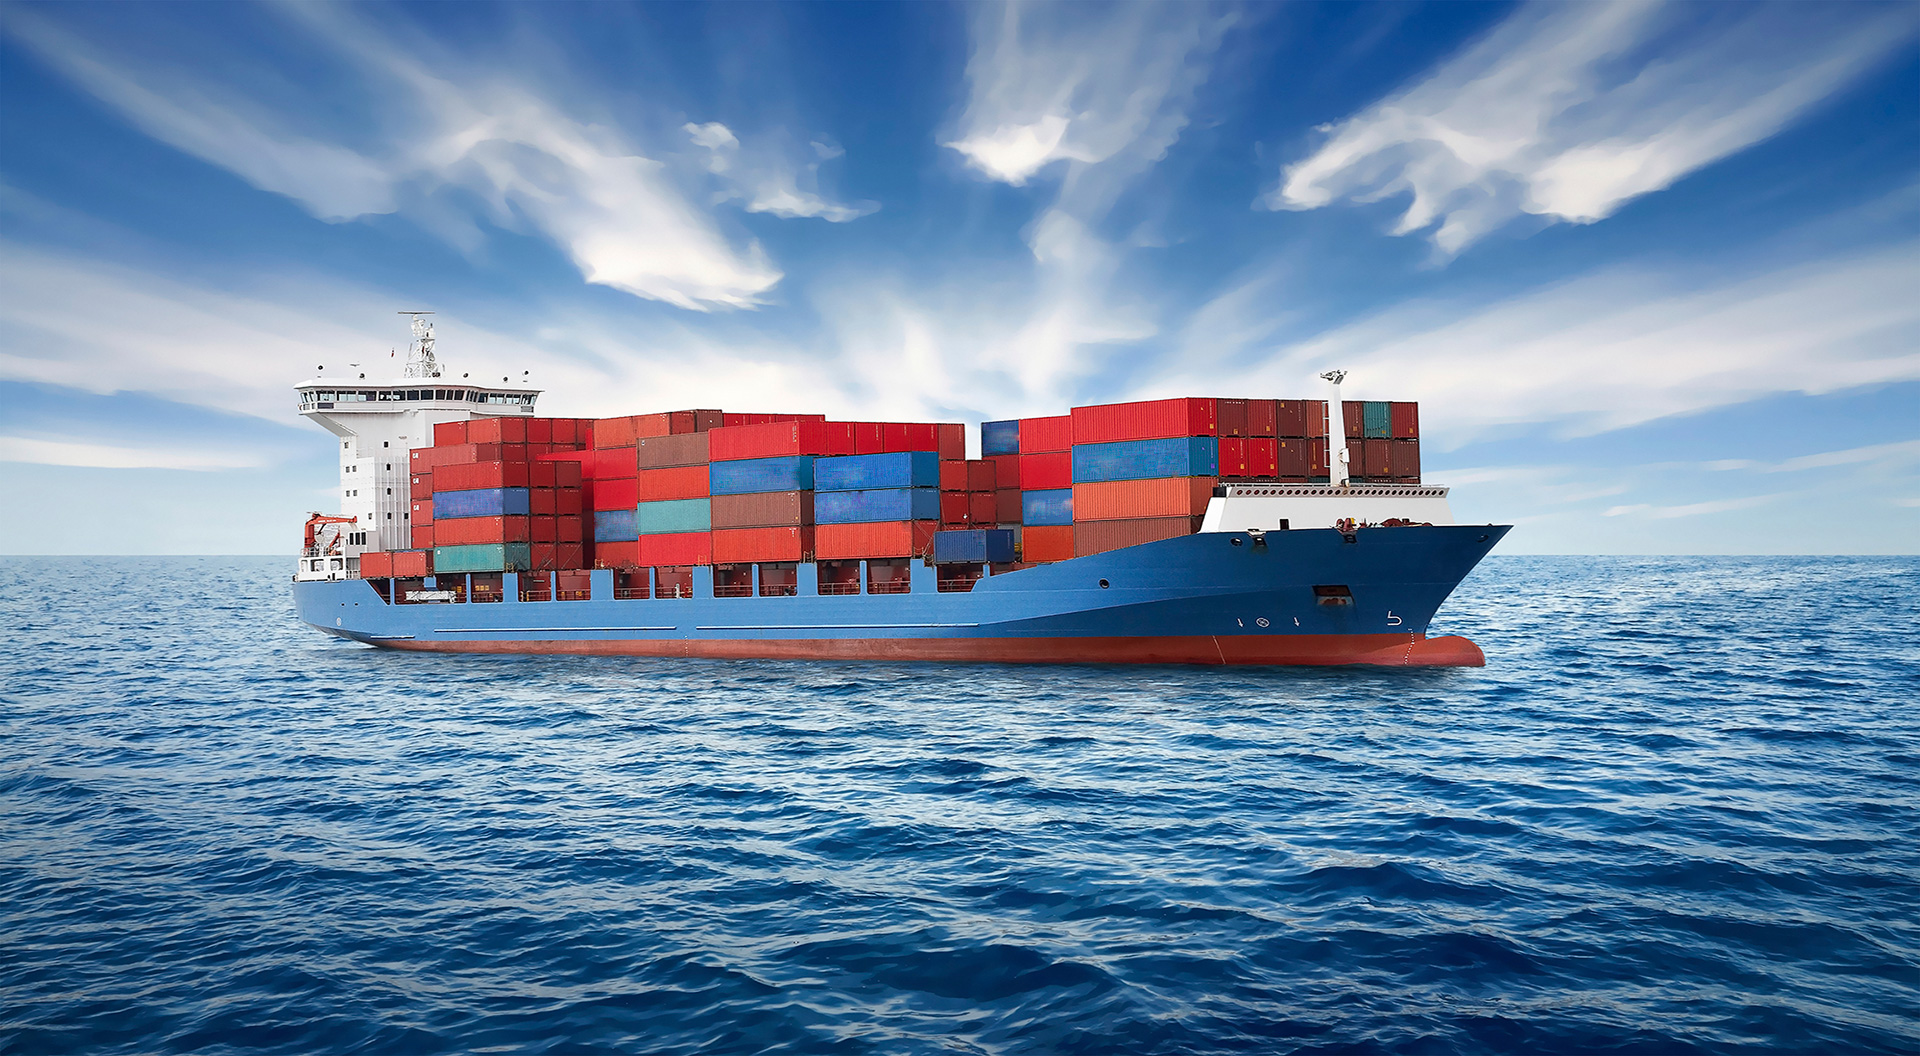 Sea freight cannot be separated from international trade